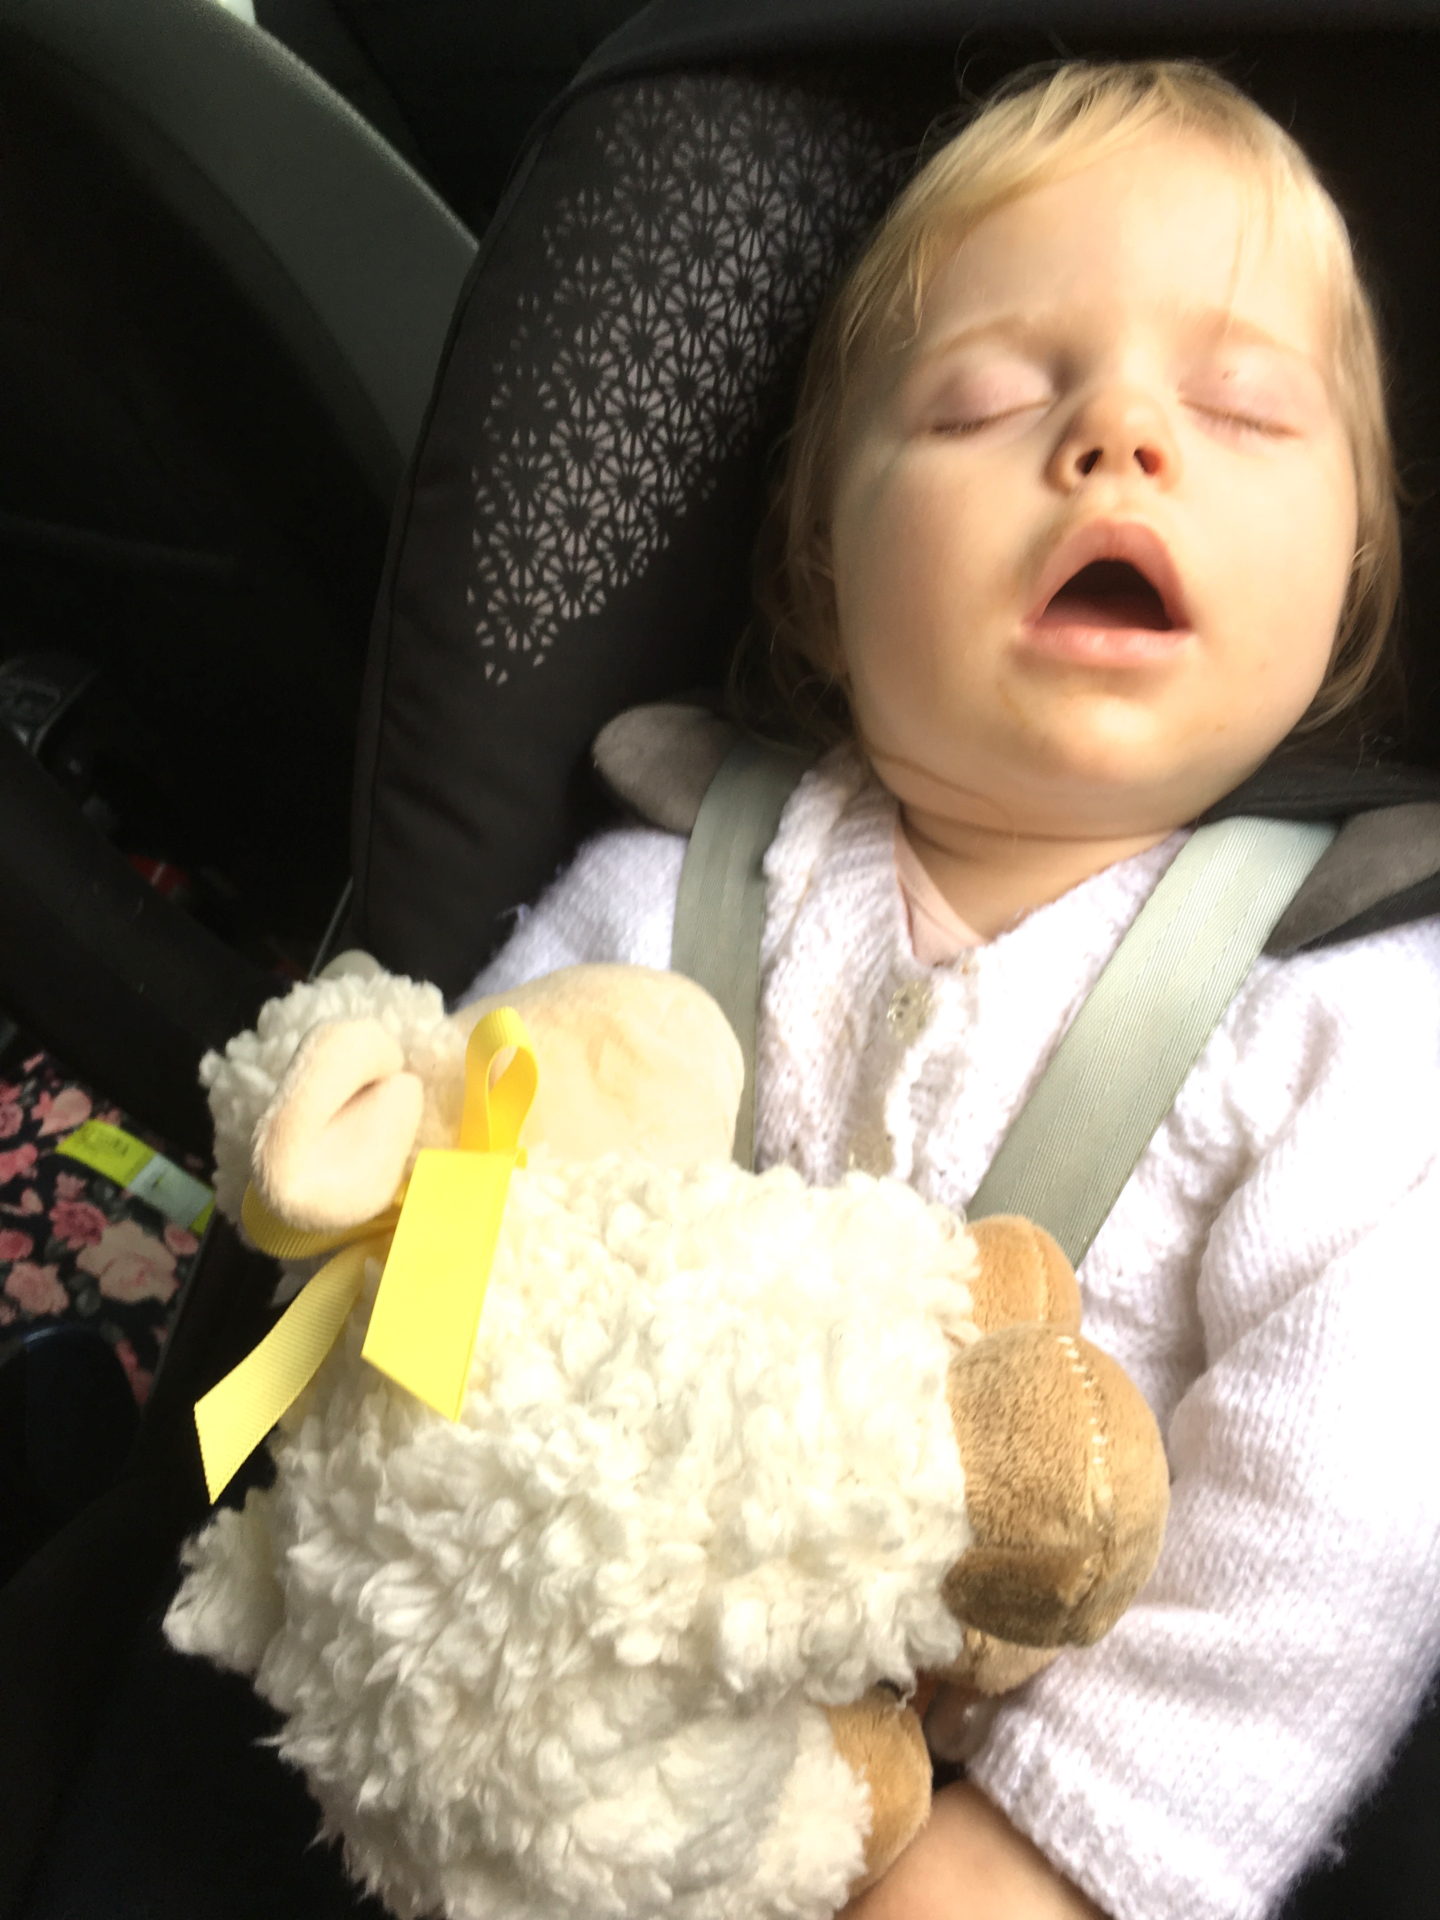 14 month old girl asleep in car seat holding toy lamb